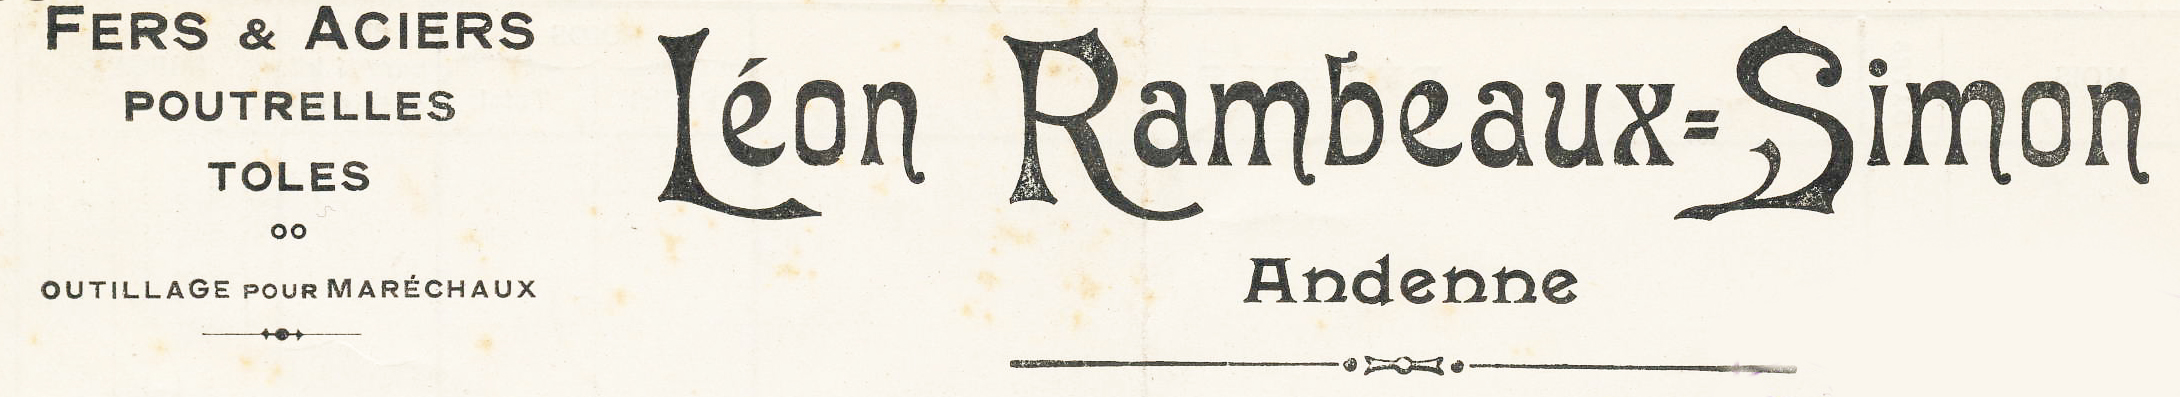 rambeaux dor quincaillerie andenne 1915